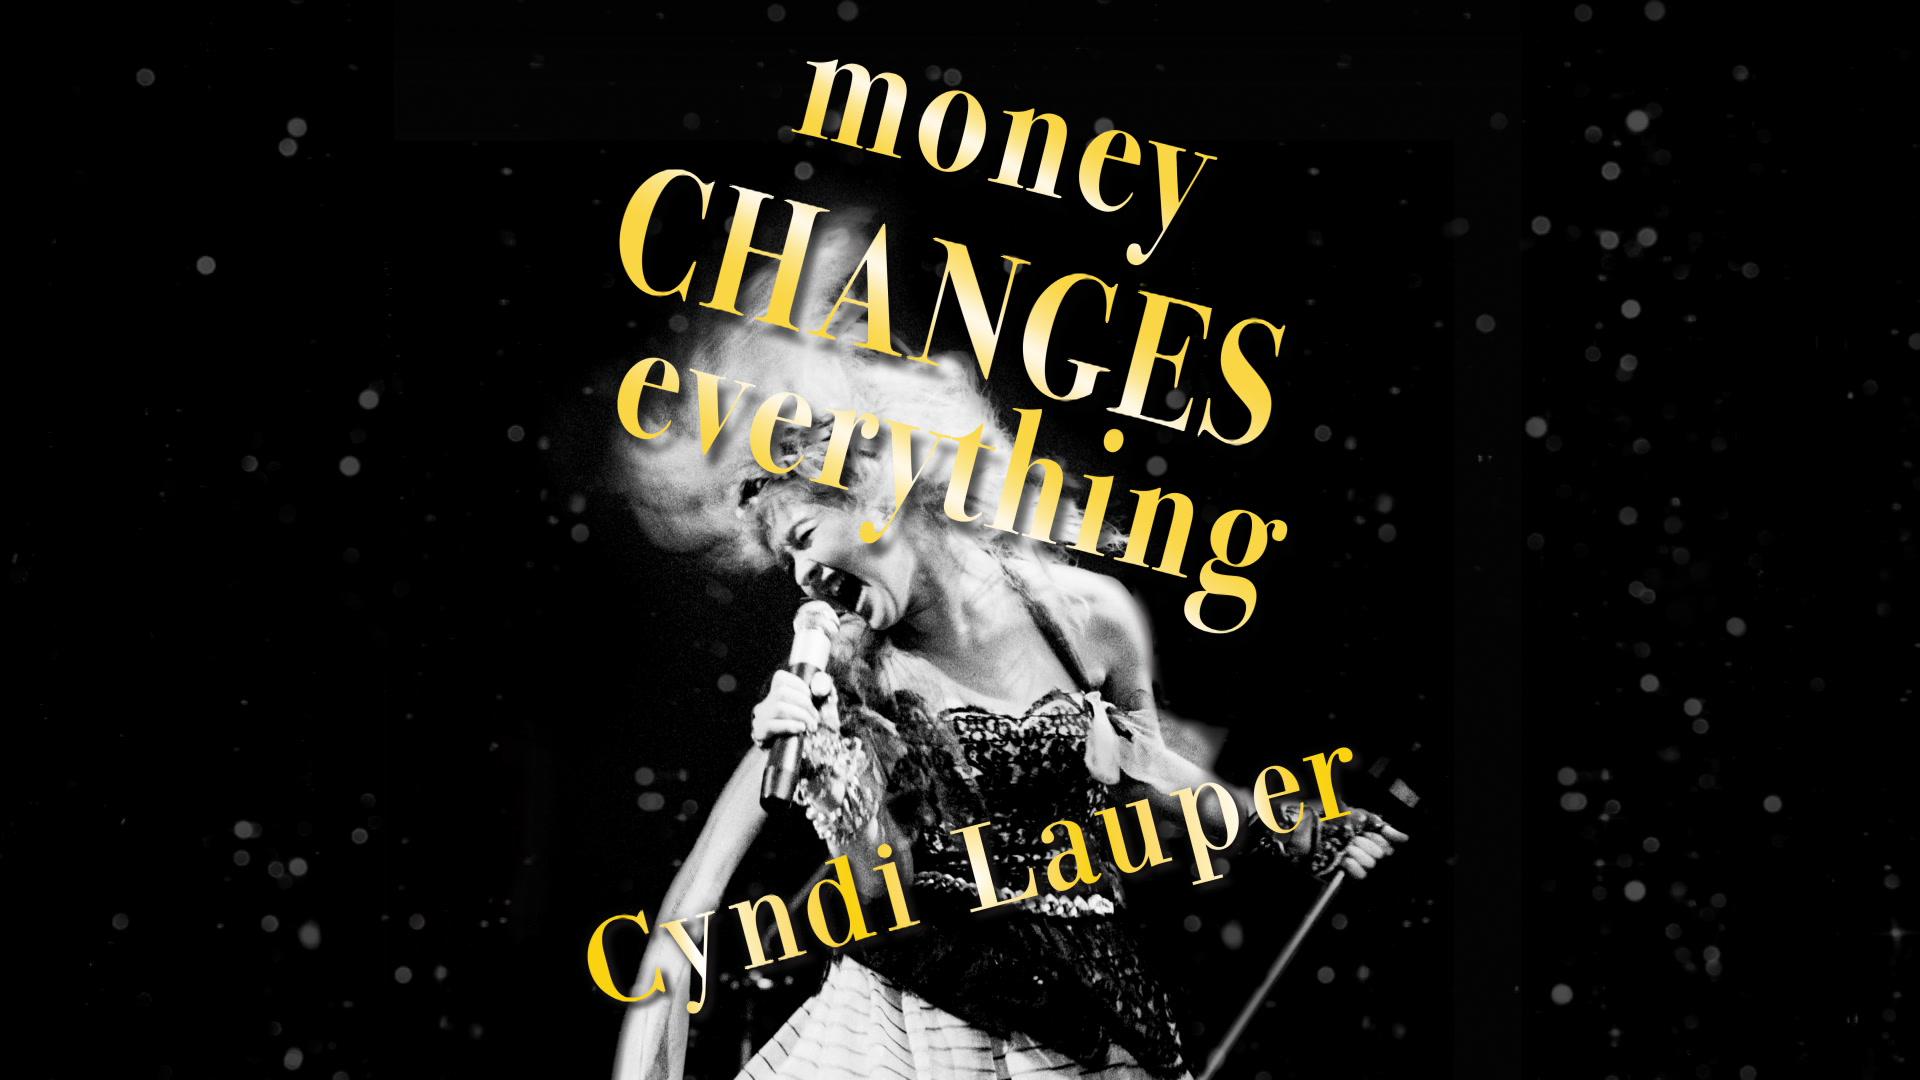 Cyndi Lauper - Money Changes Everything (Live at Irvine Meadows Amphitheater, Laguna Hills, CA - 09/22/1984 - Let The Canary Sing Edit)